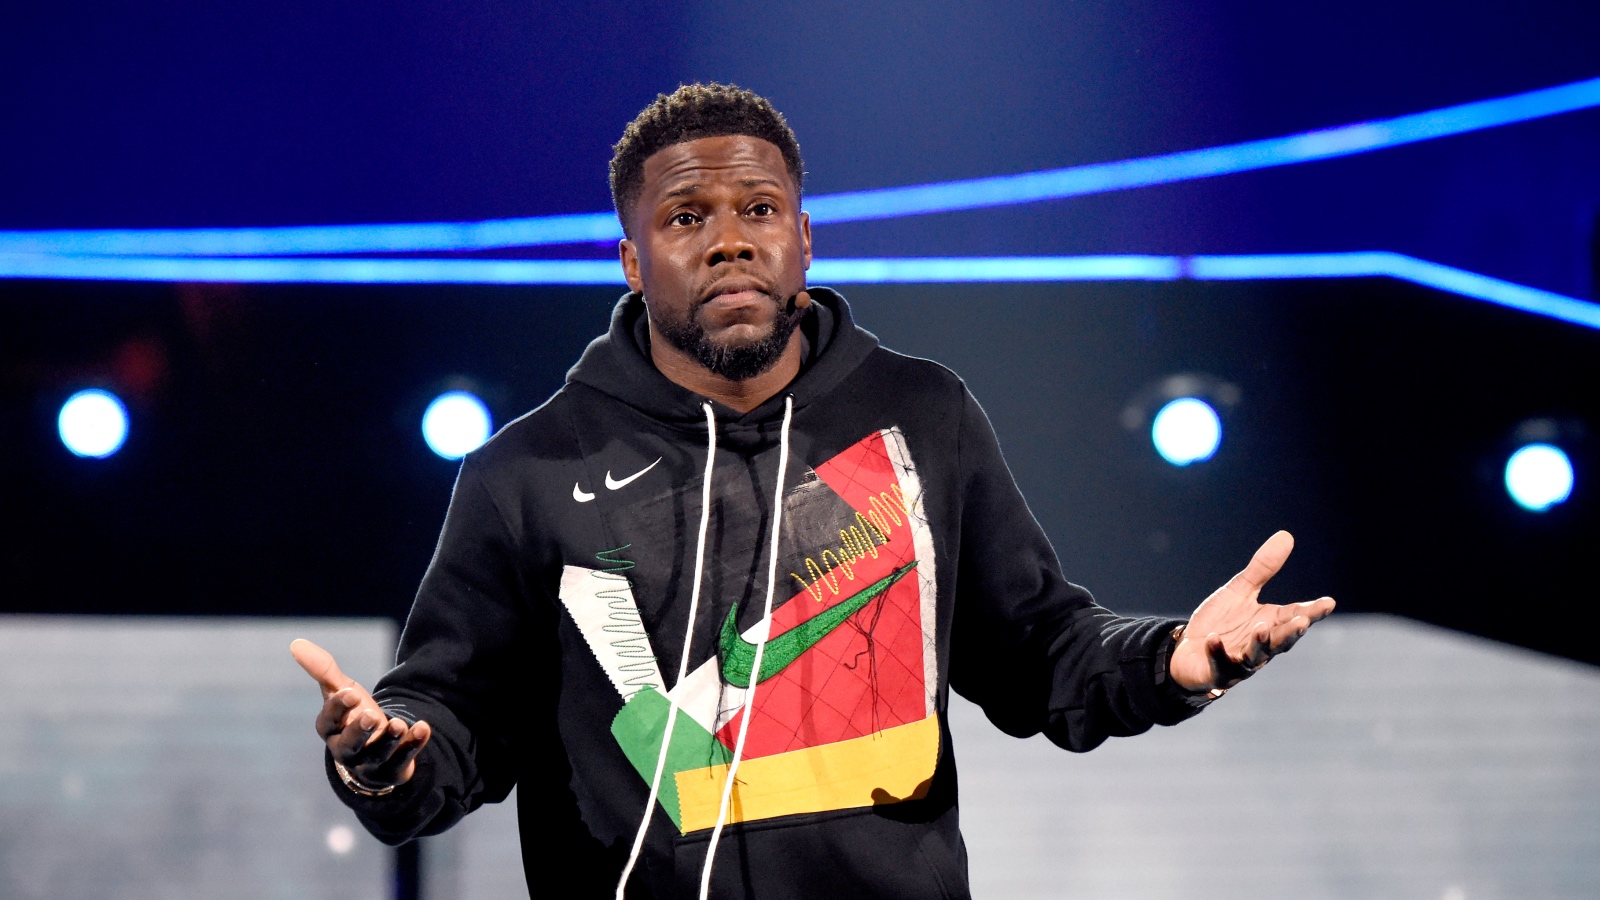 Kevin Hart with his hands up shrugging